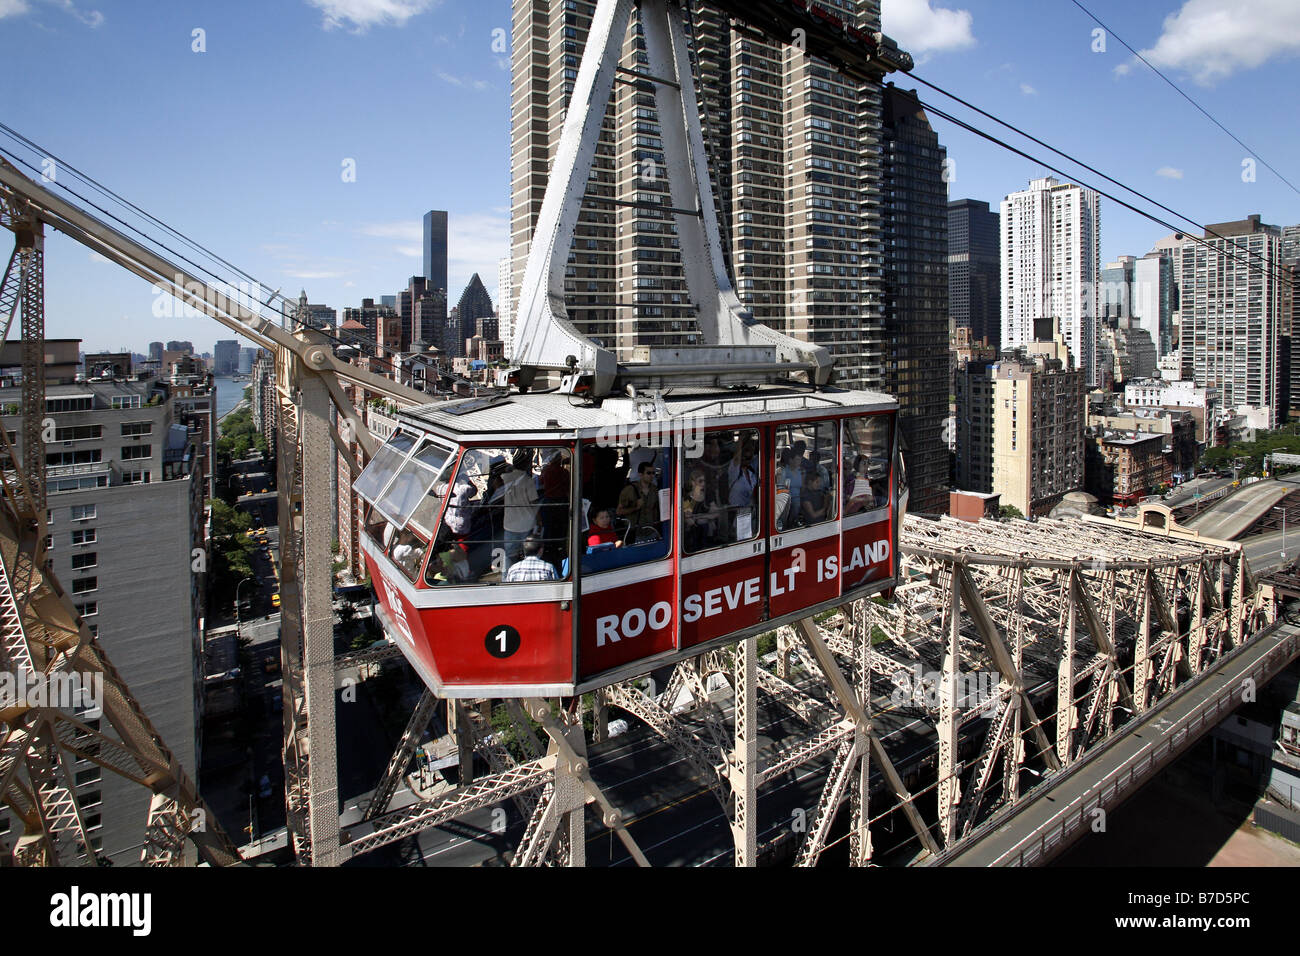 Roosevelt Island Tramway, New York City, USA Banque D'Images